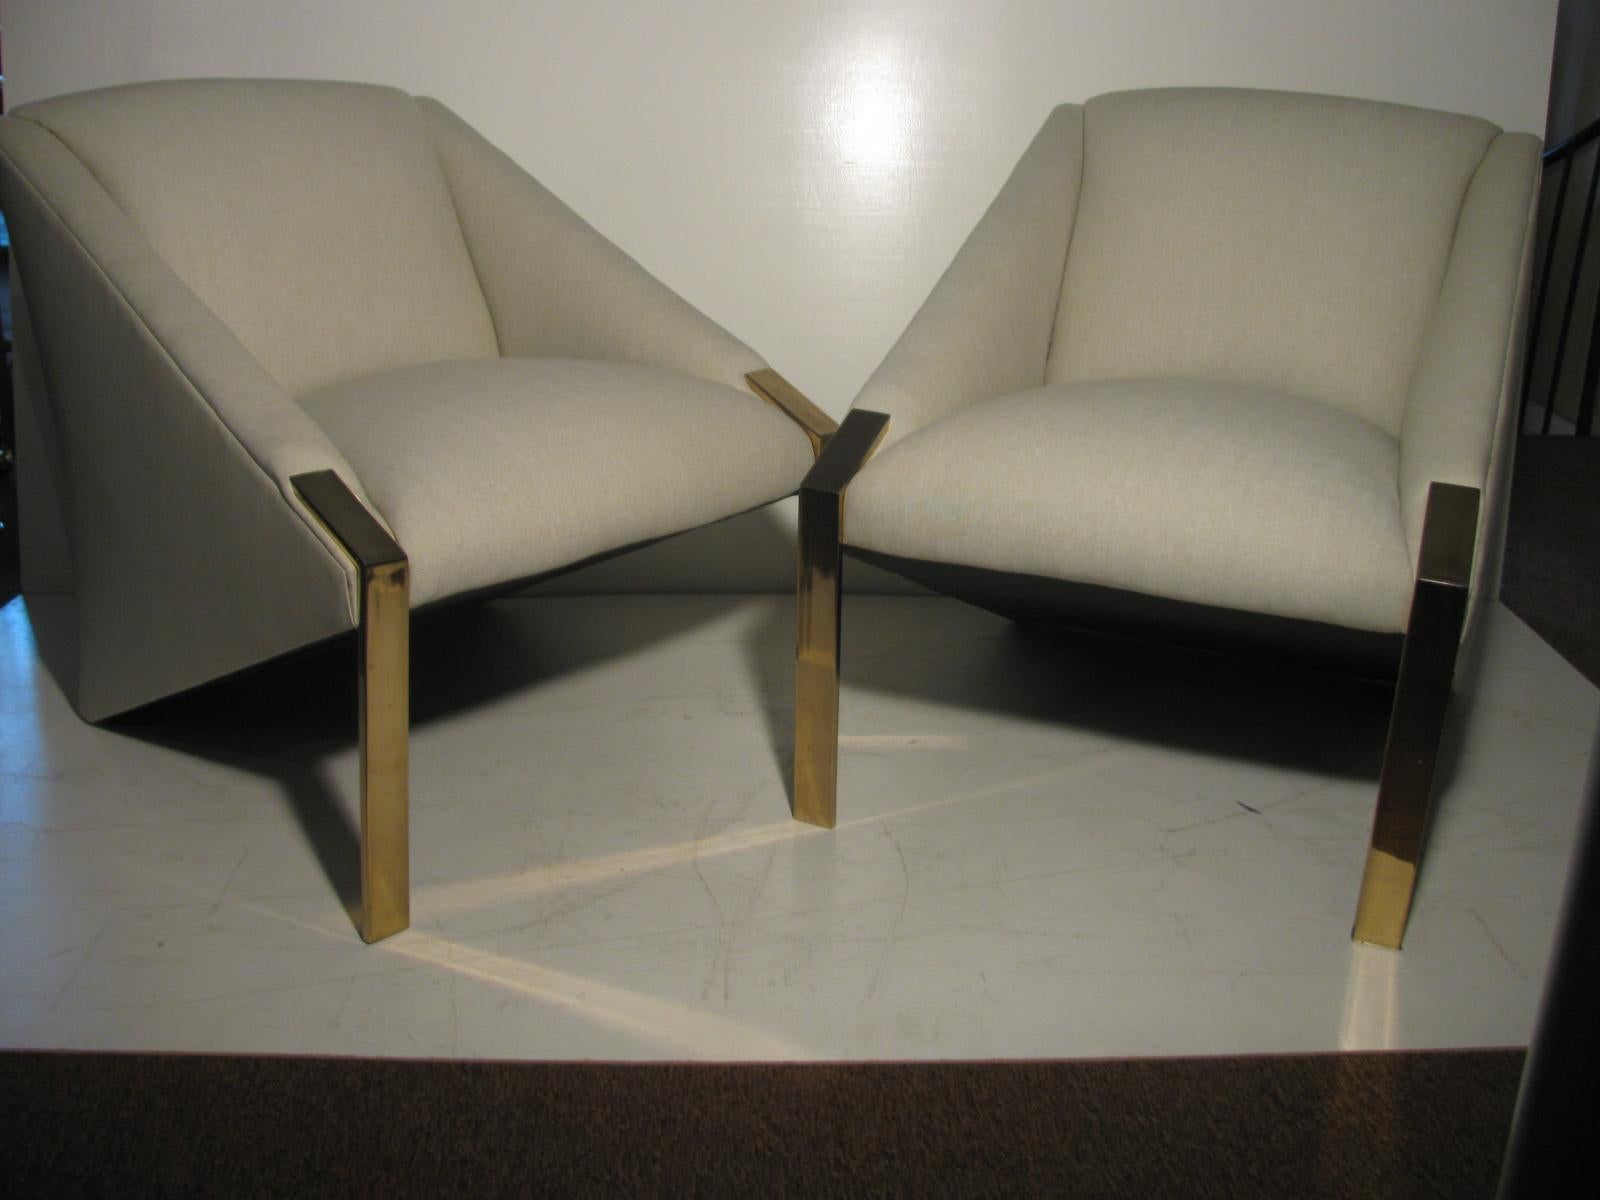 Rare pair of exceptional sculpted lounge chairs. Angular, sleek and sexy pair of very comfortable lounge chairs. Heavy duty frames which were newly reupholstered in a simple tweed fabric which is a light beige in color. Chrome legs upfront. 